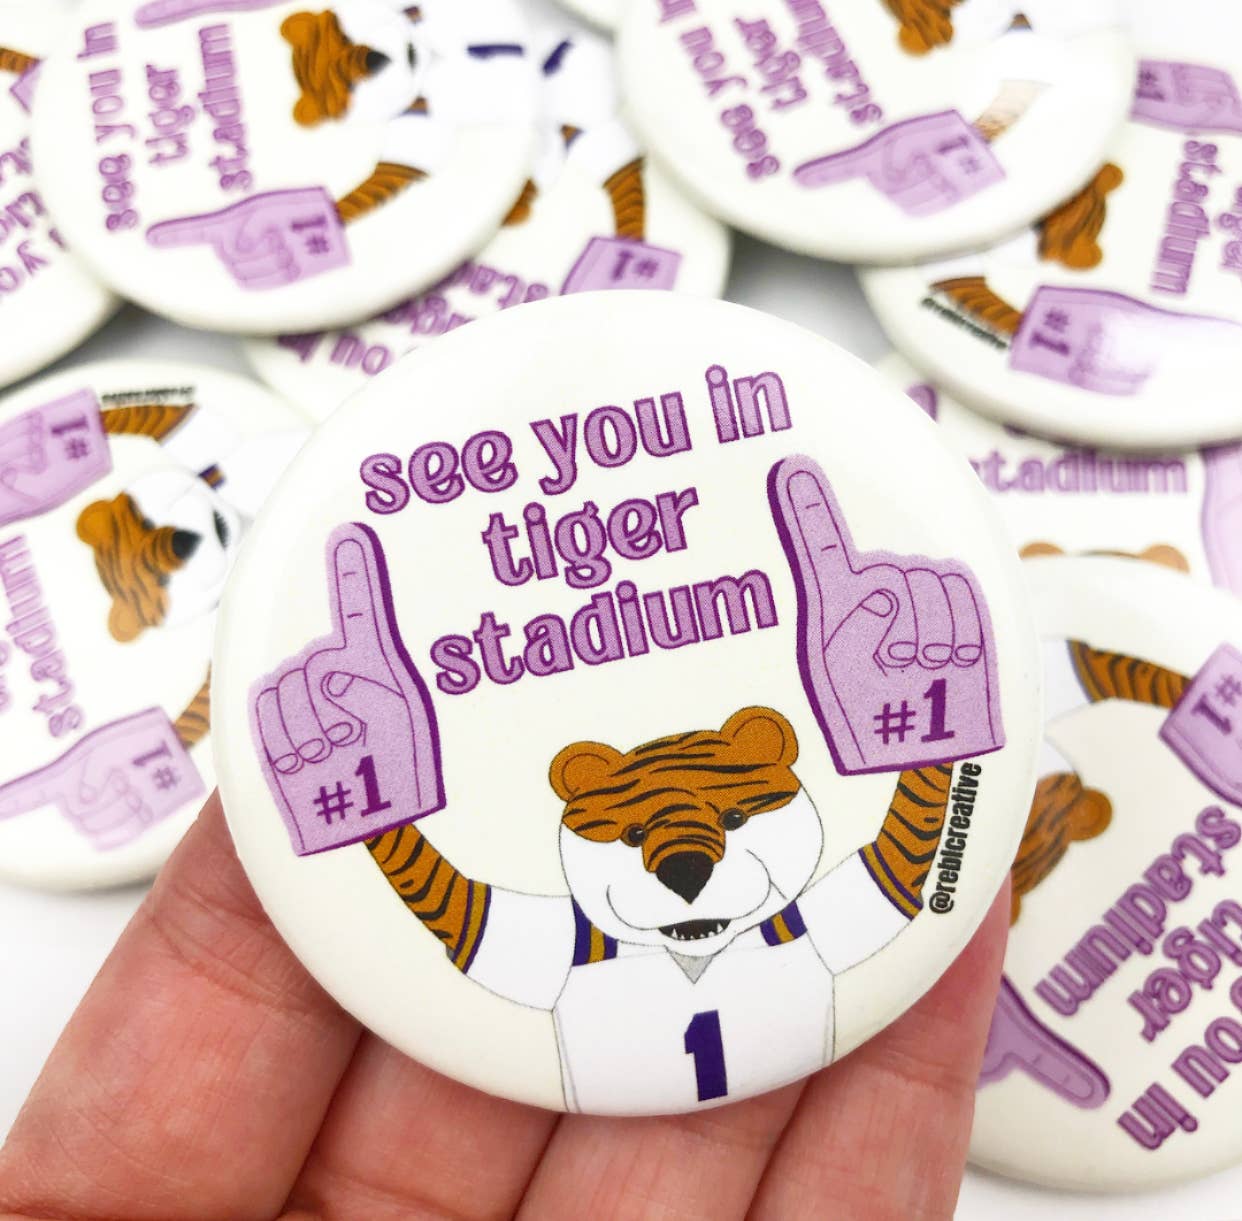 With enthusiastic team spirit, a person is proudly holding a "GAME DAY BUTTON - See you in Tiger Stadium" that bears the brand name of REBL Creative.